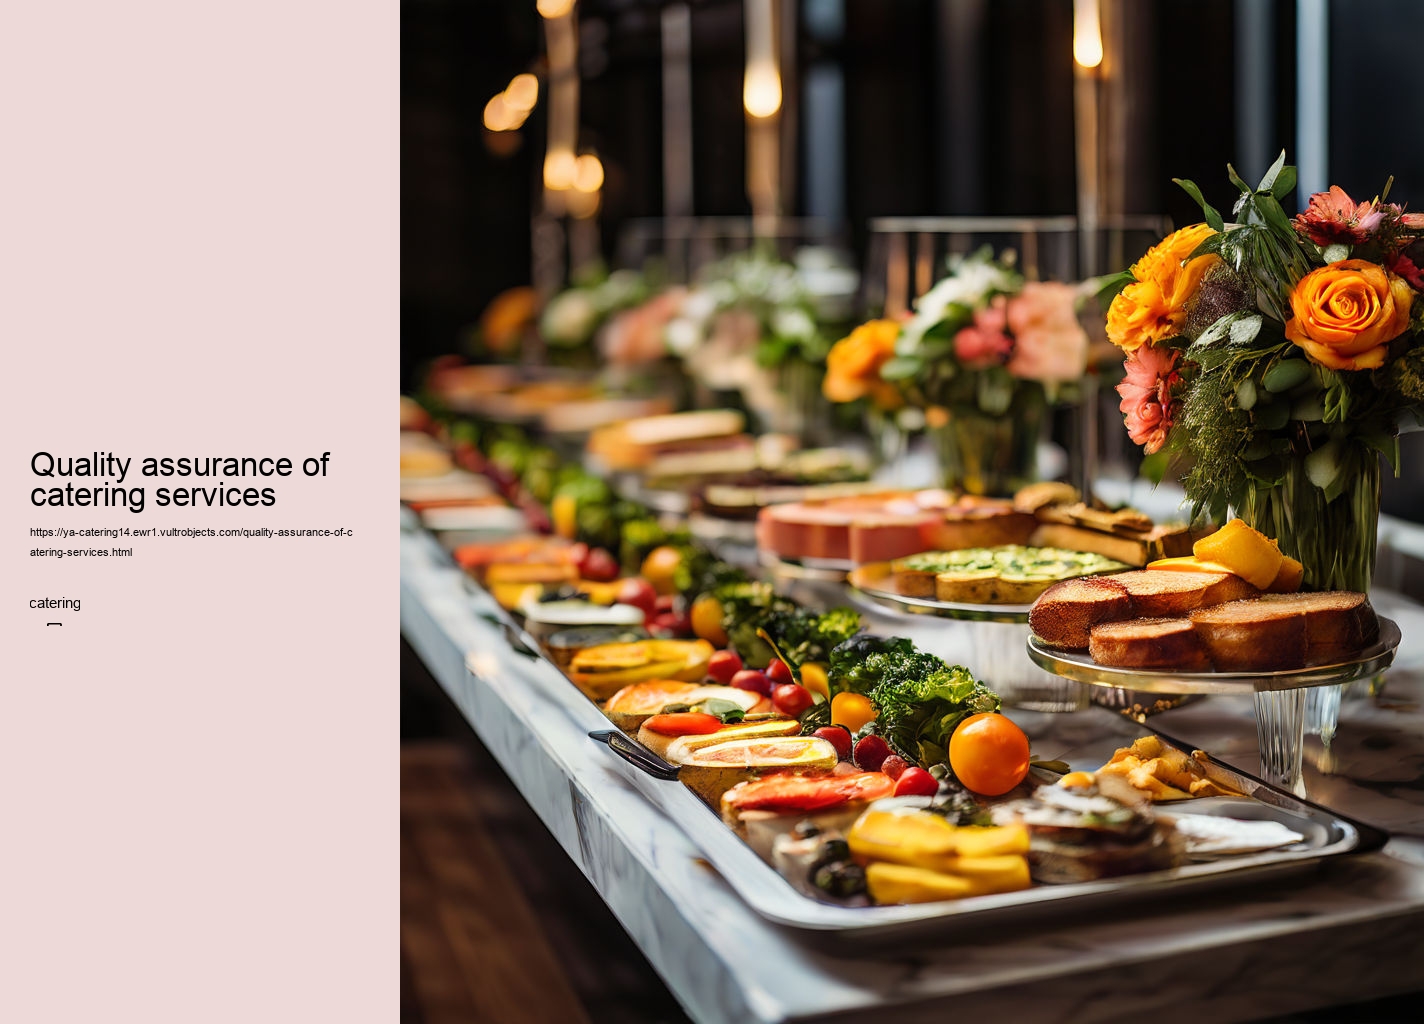 Quality assurance of catering services